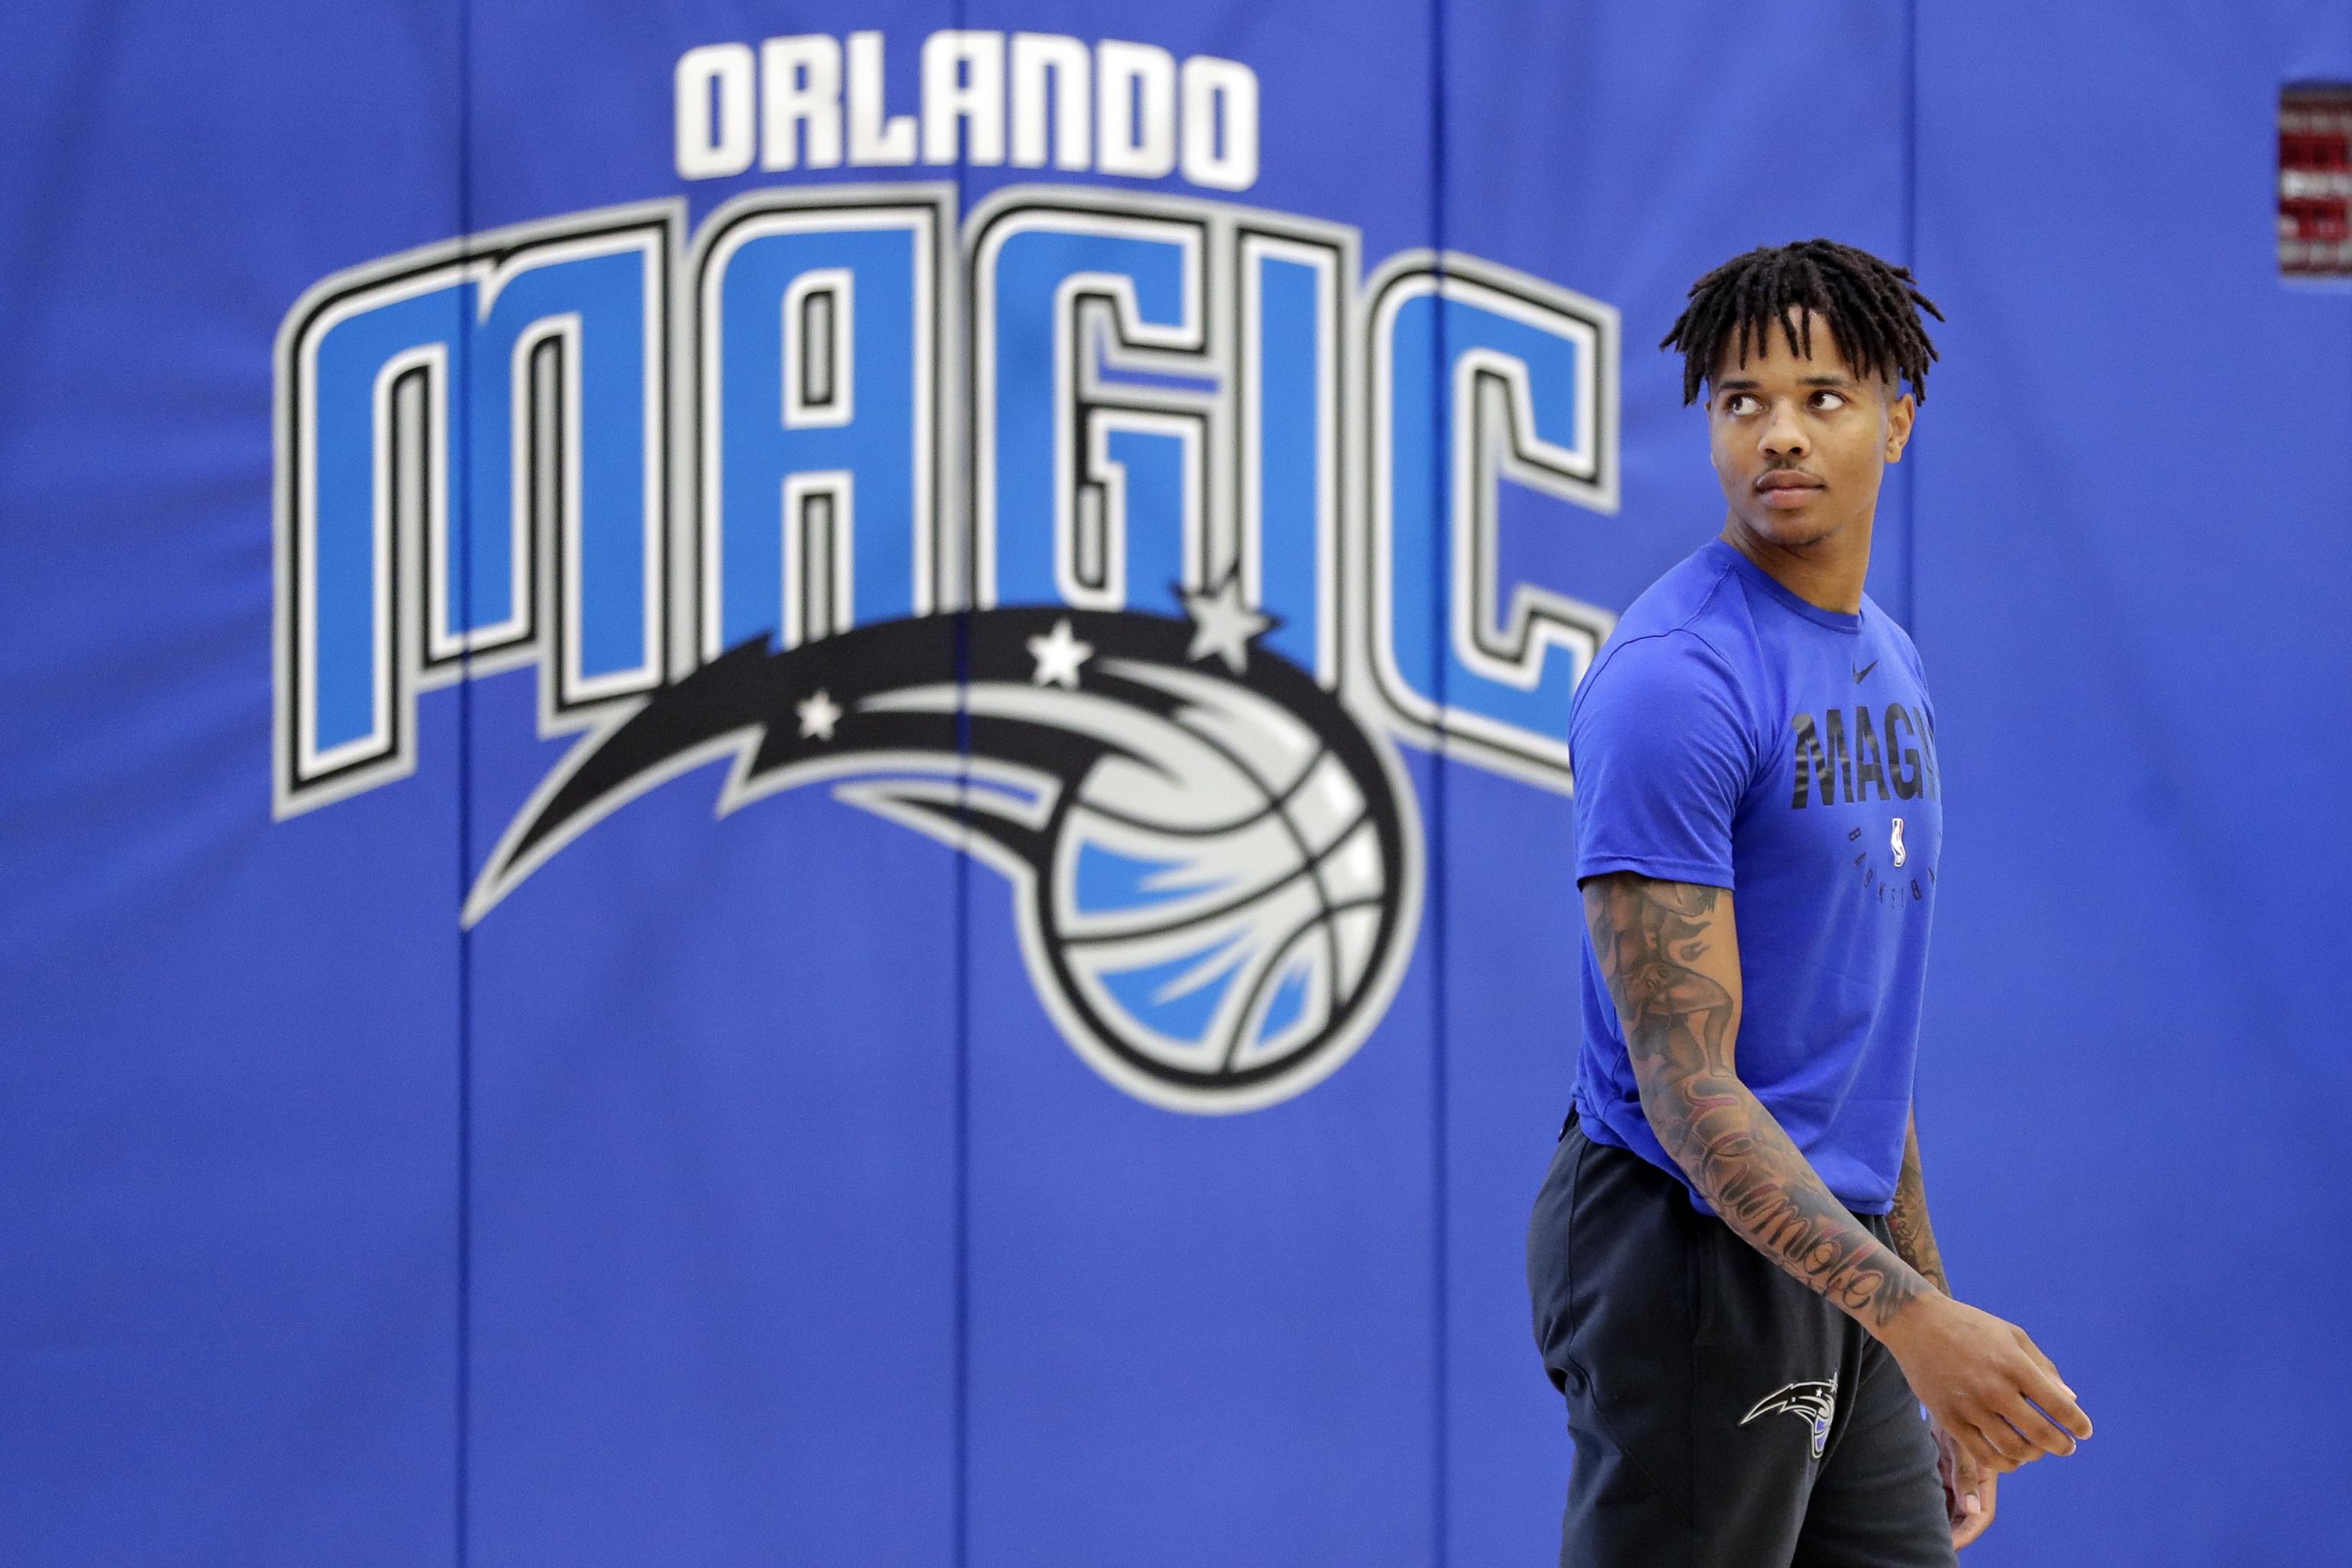 Markelle Fultz is making a big impact for the Orlando Magic